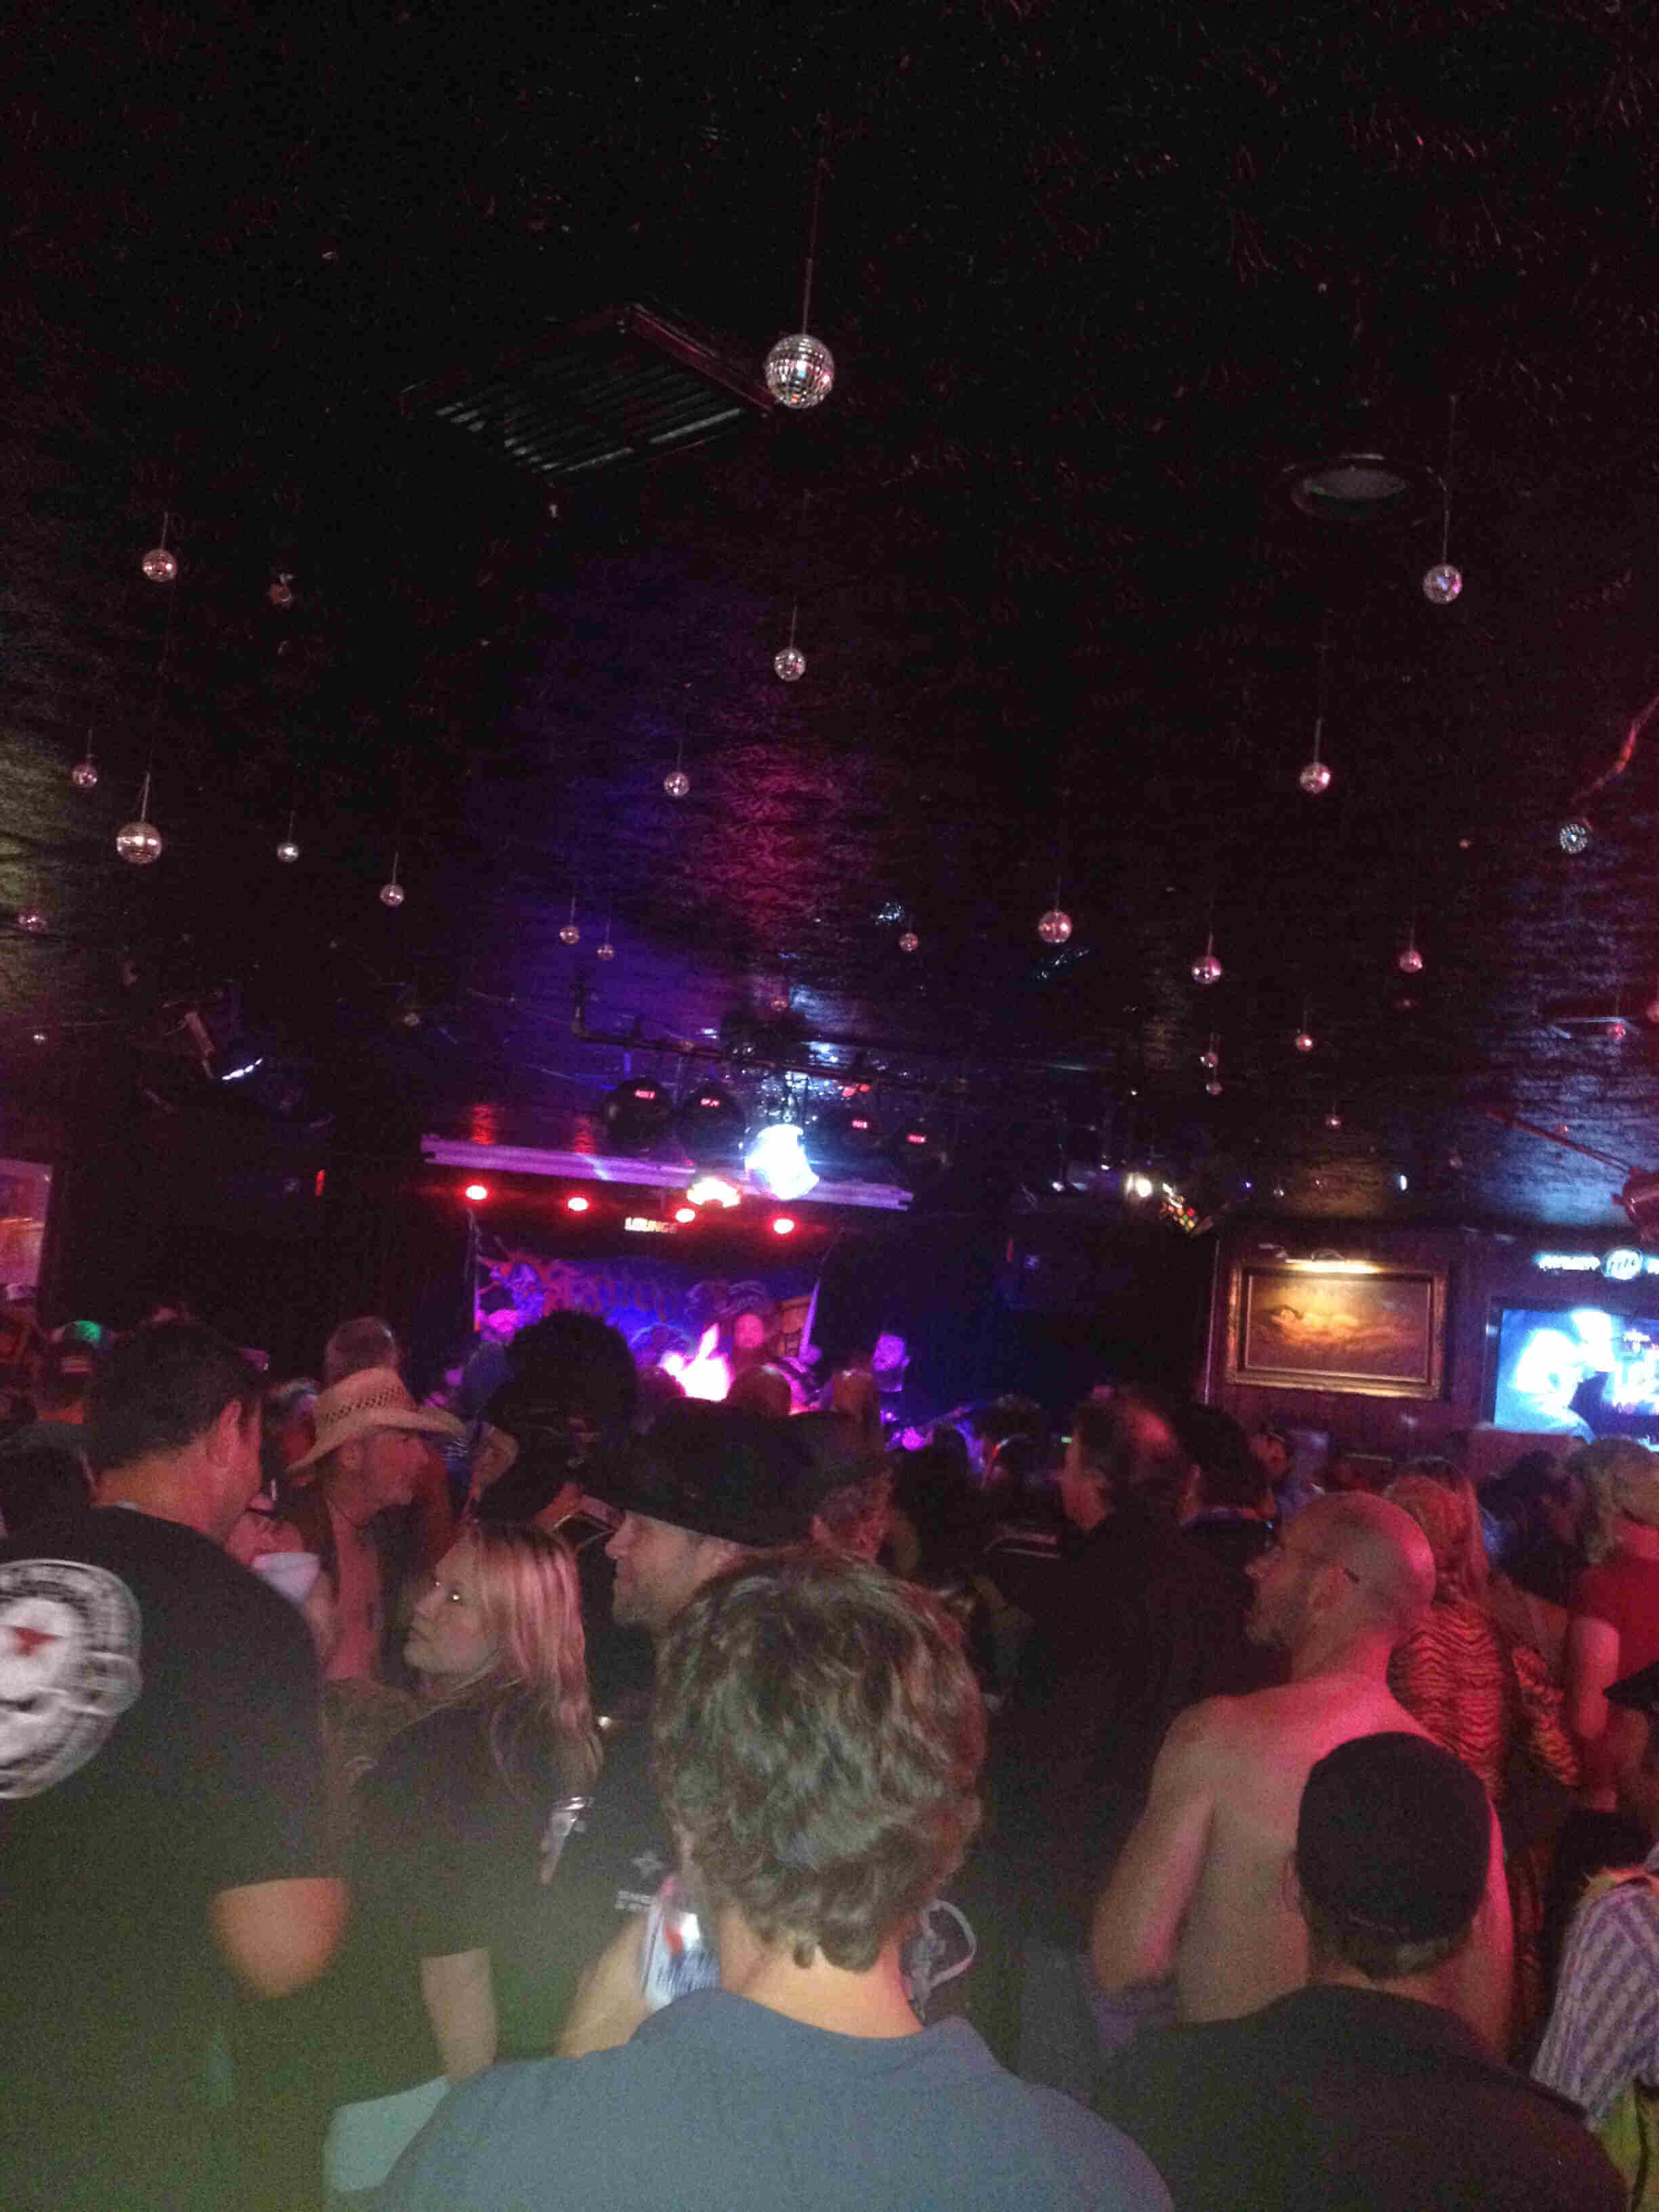 Rear view from the back of a dimly lit room, with people watching a band that's on stage